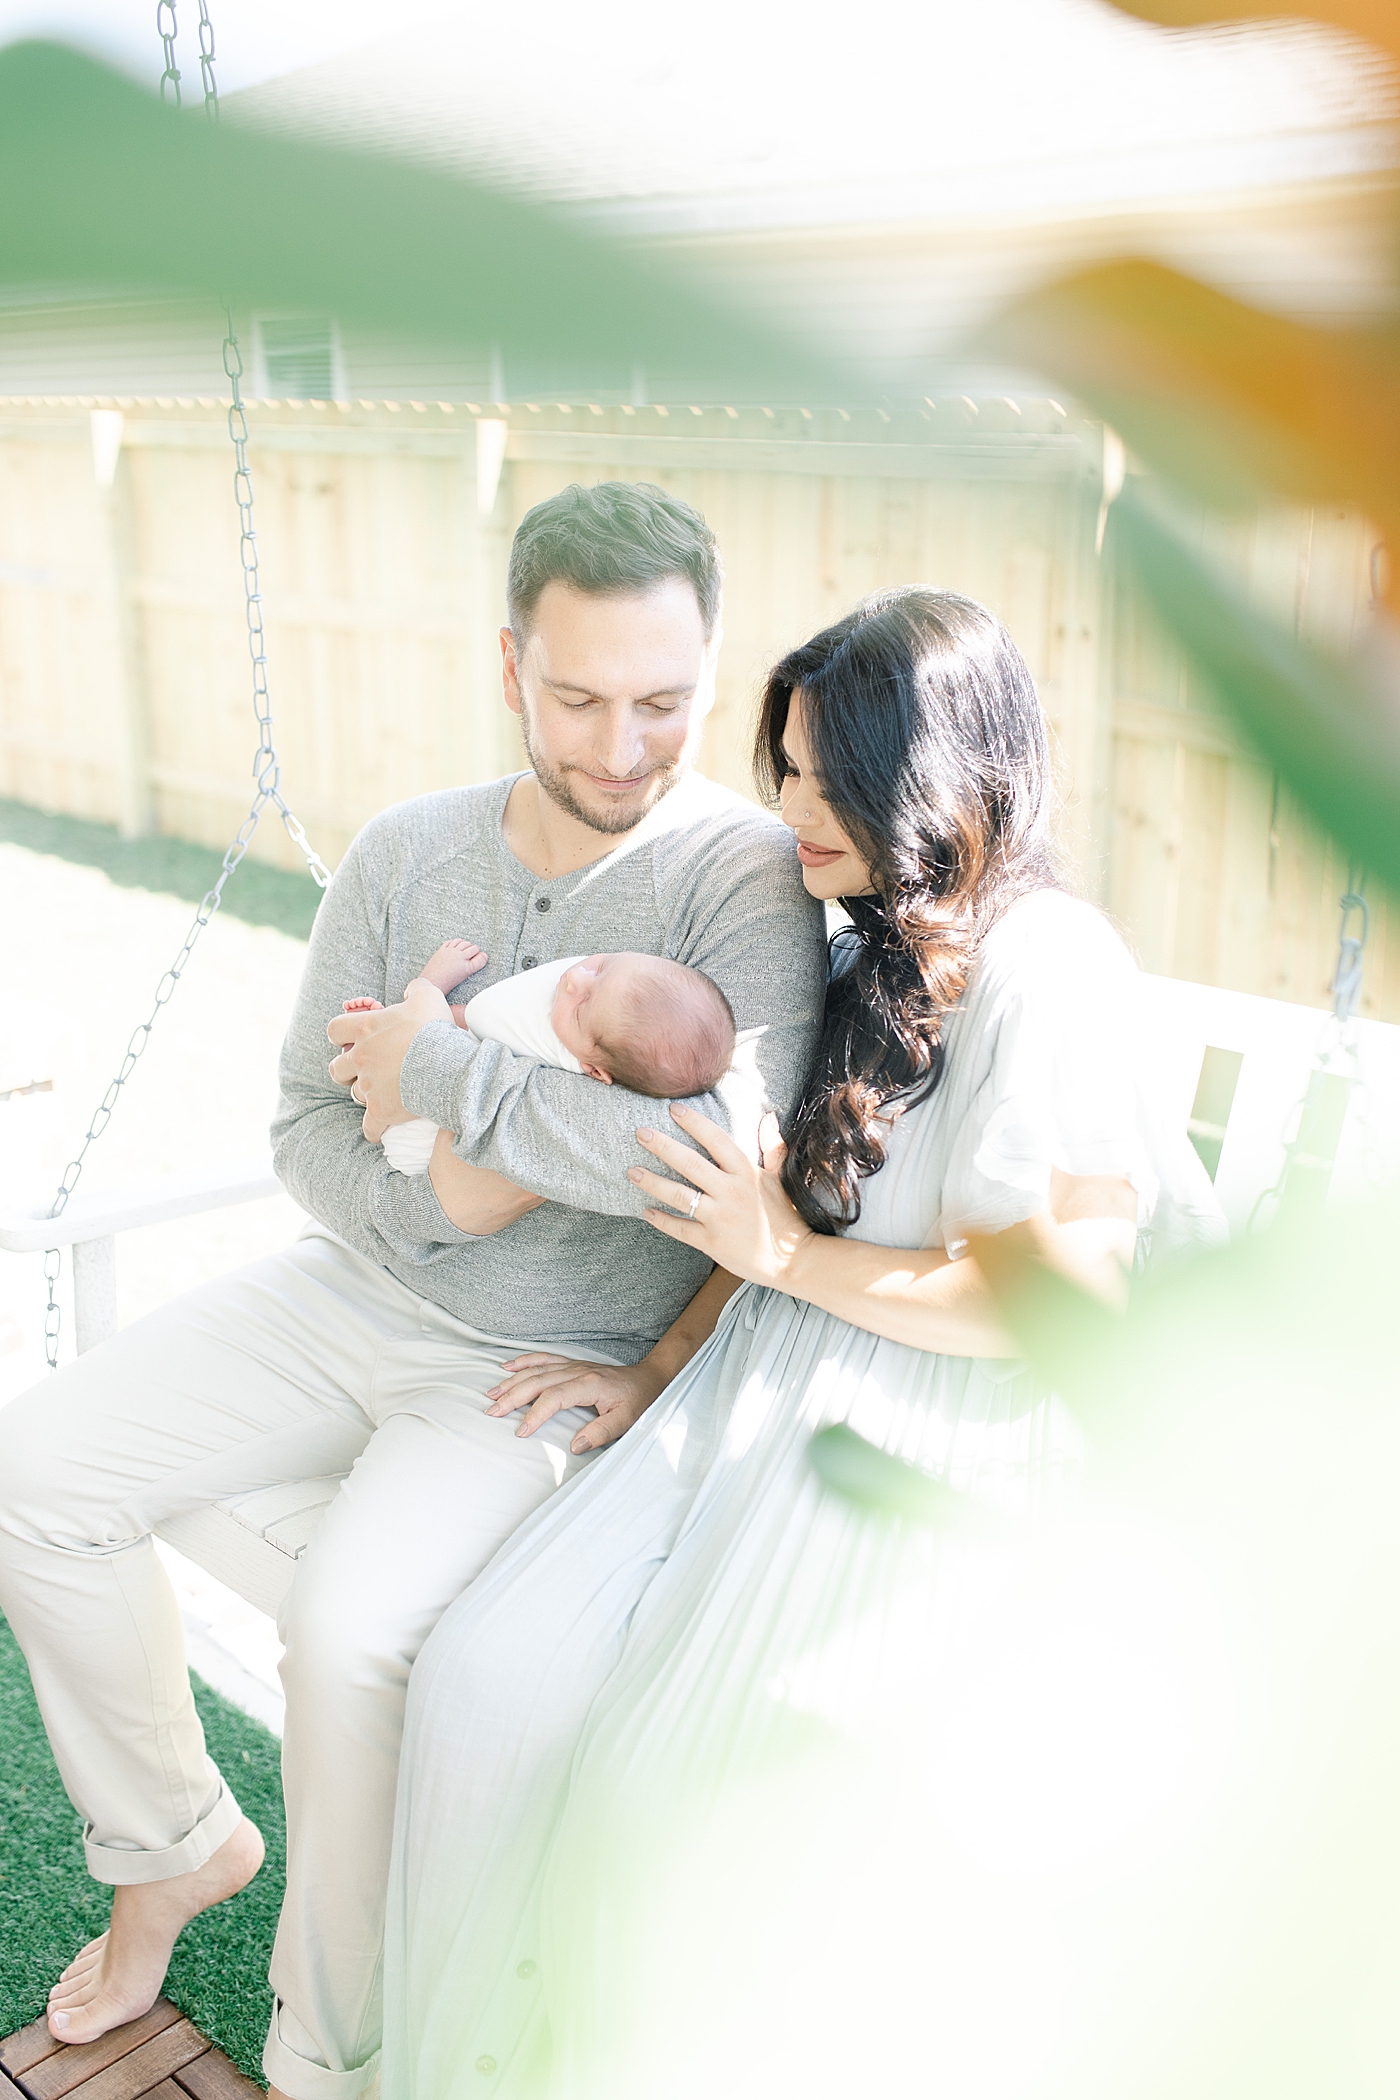 Mom dad and newborn baby sitting on porch swing | Photo by Little Sunshine Photography